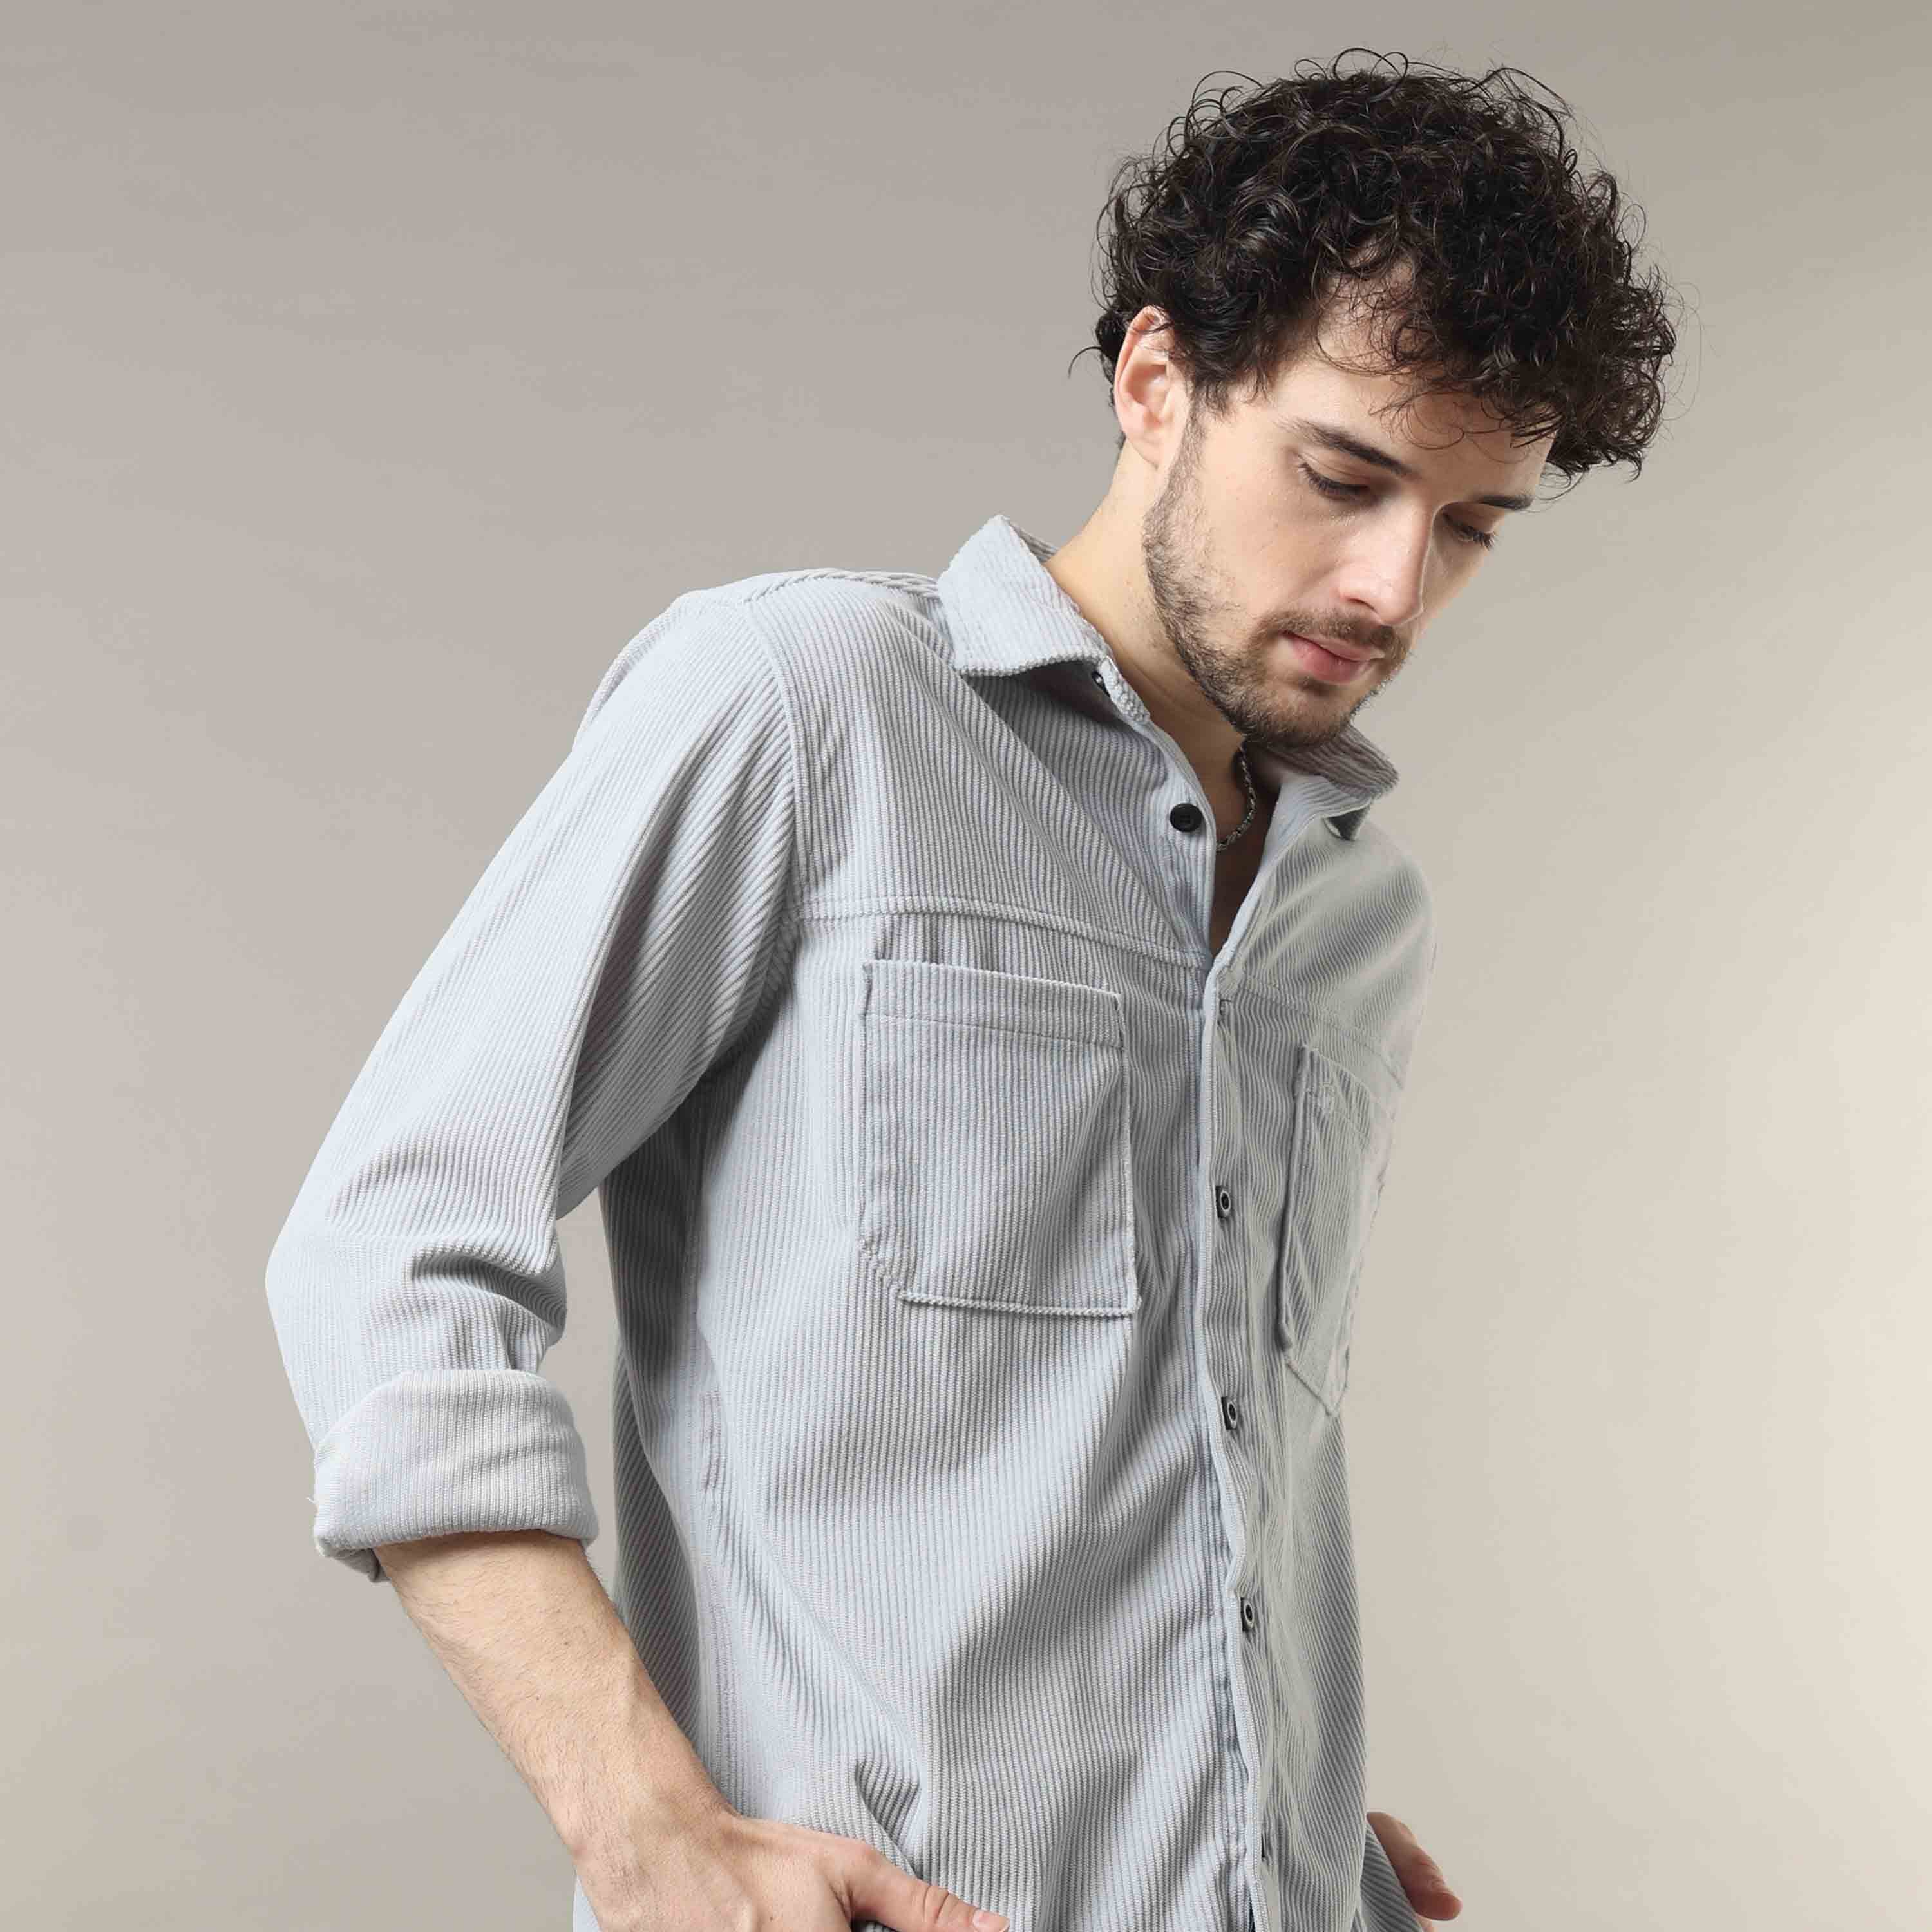 Buy Latest Grey Corduroy Fabric Shirt at Great PriceRs. 1499.00